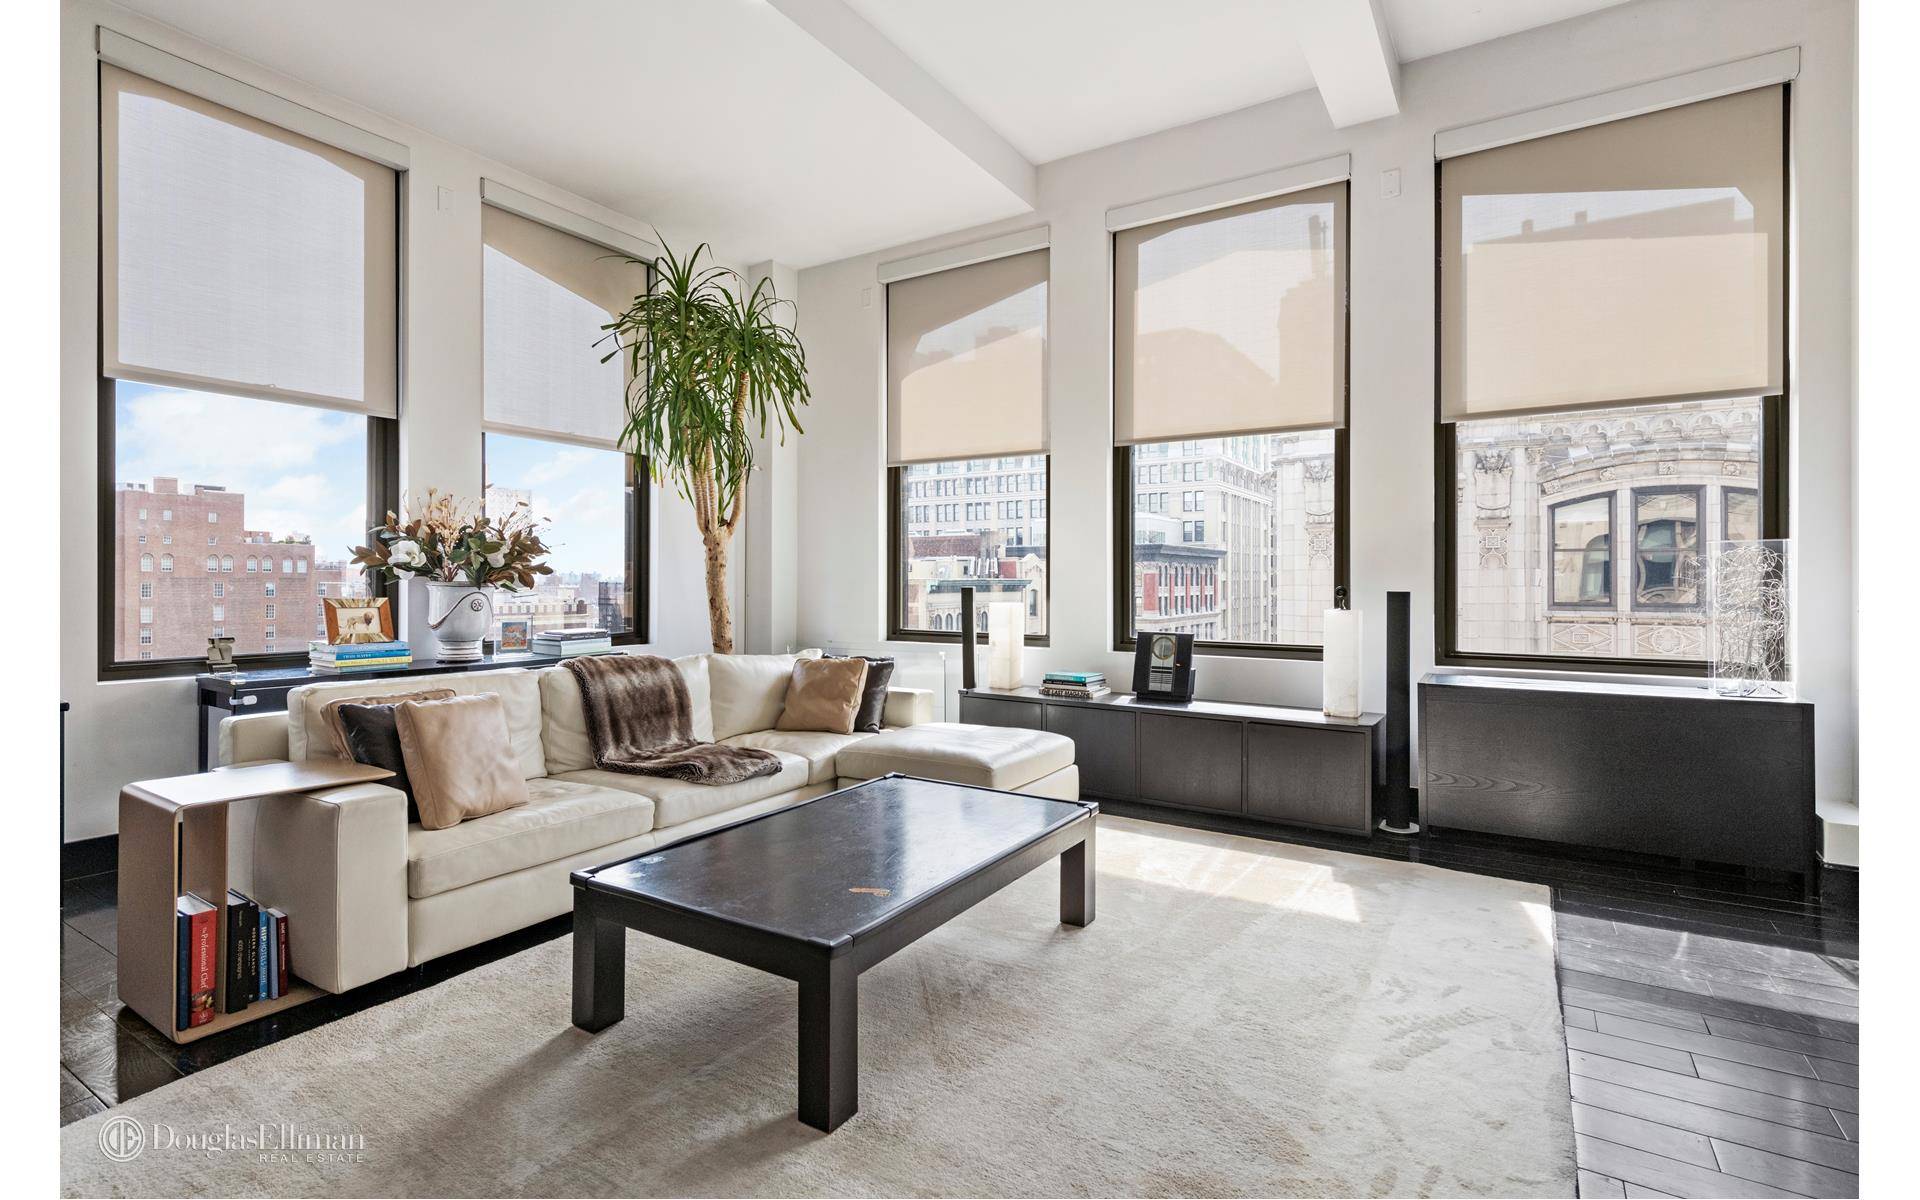 First time ever offered this spectacular combined corner Penthouse loft, is truly one of a kind.